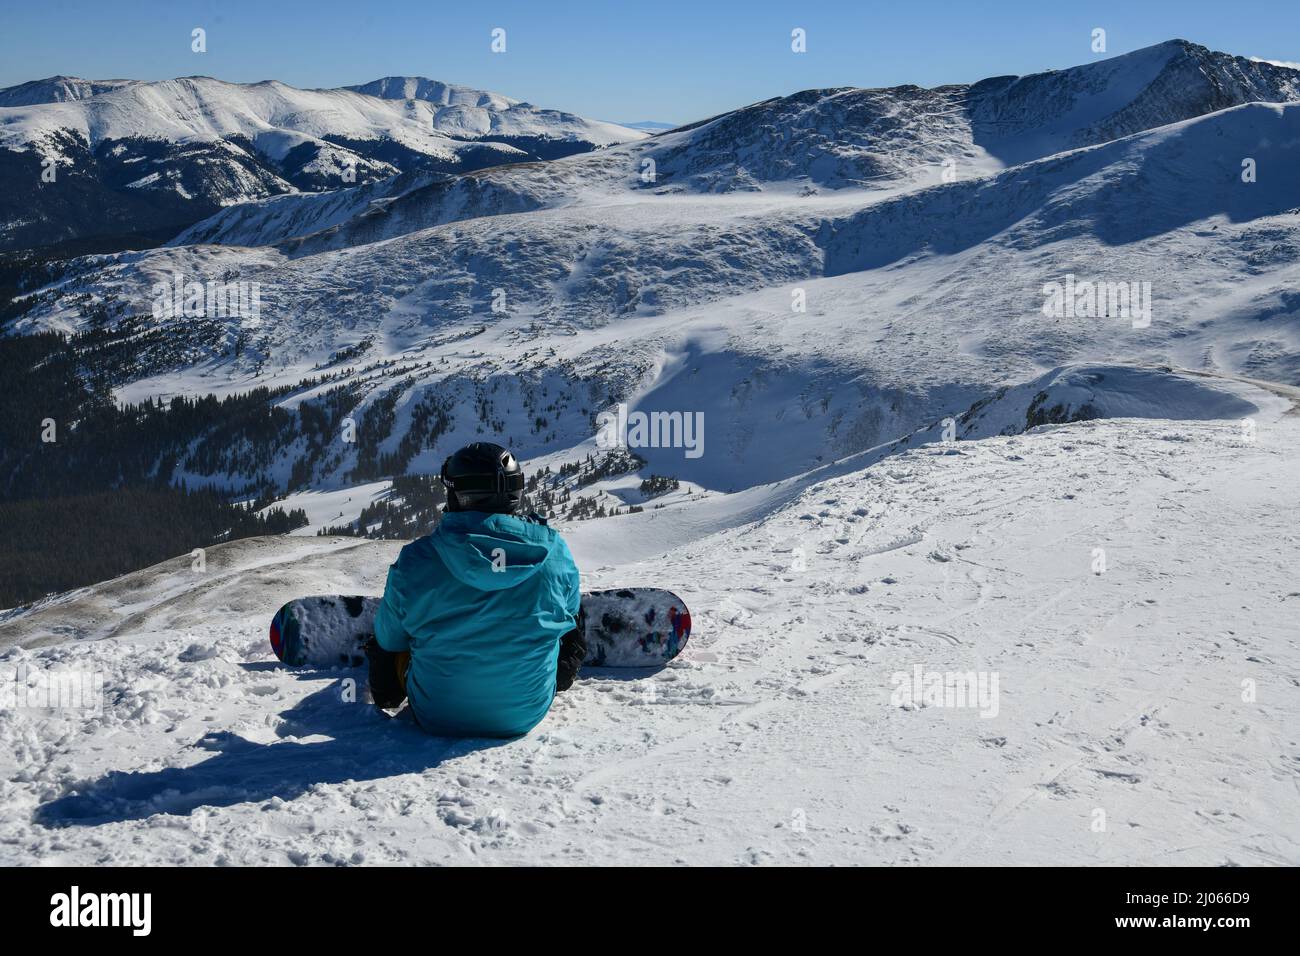 Snowboarder sitting on the top of Peak 8 at the Breckenridge Ski Resort in Colorado. Active lifestyle, extreme winter sports. Stock Photo